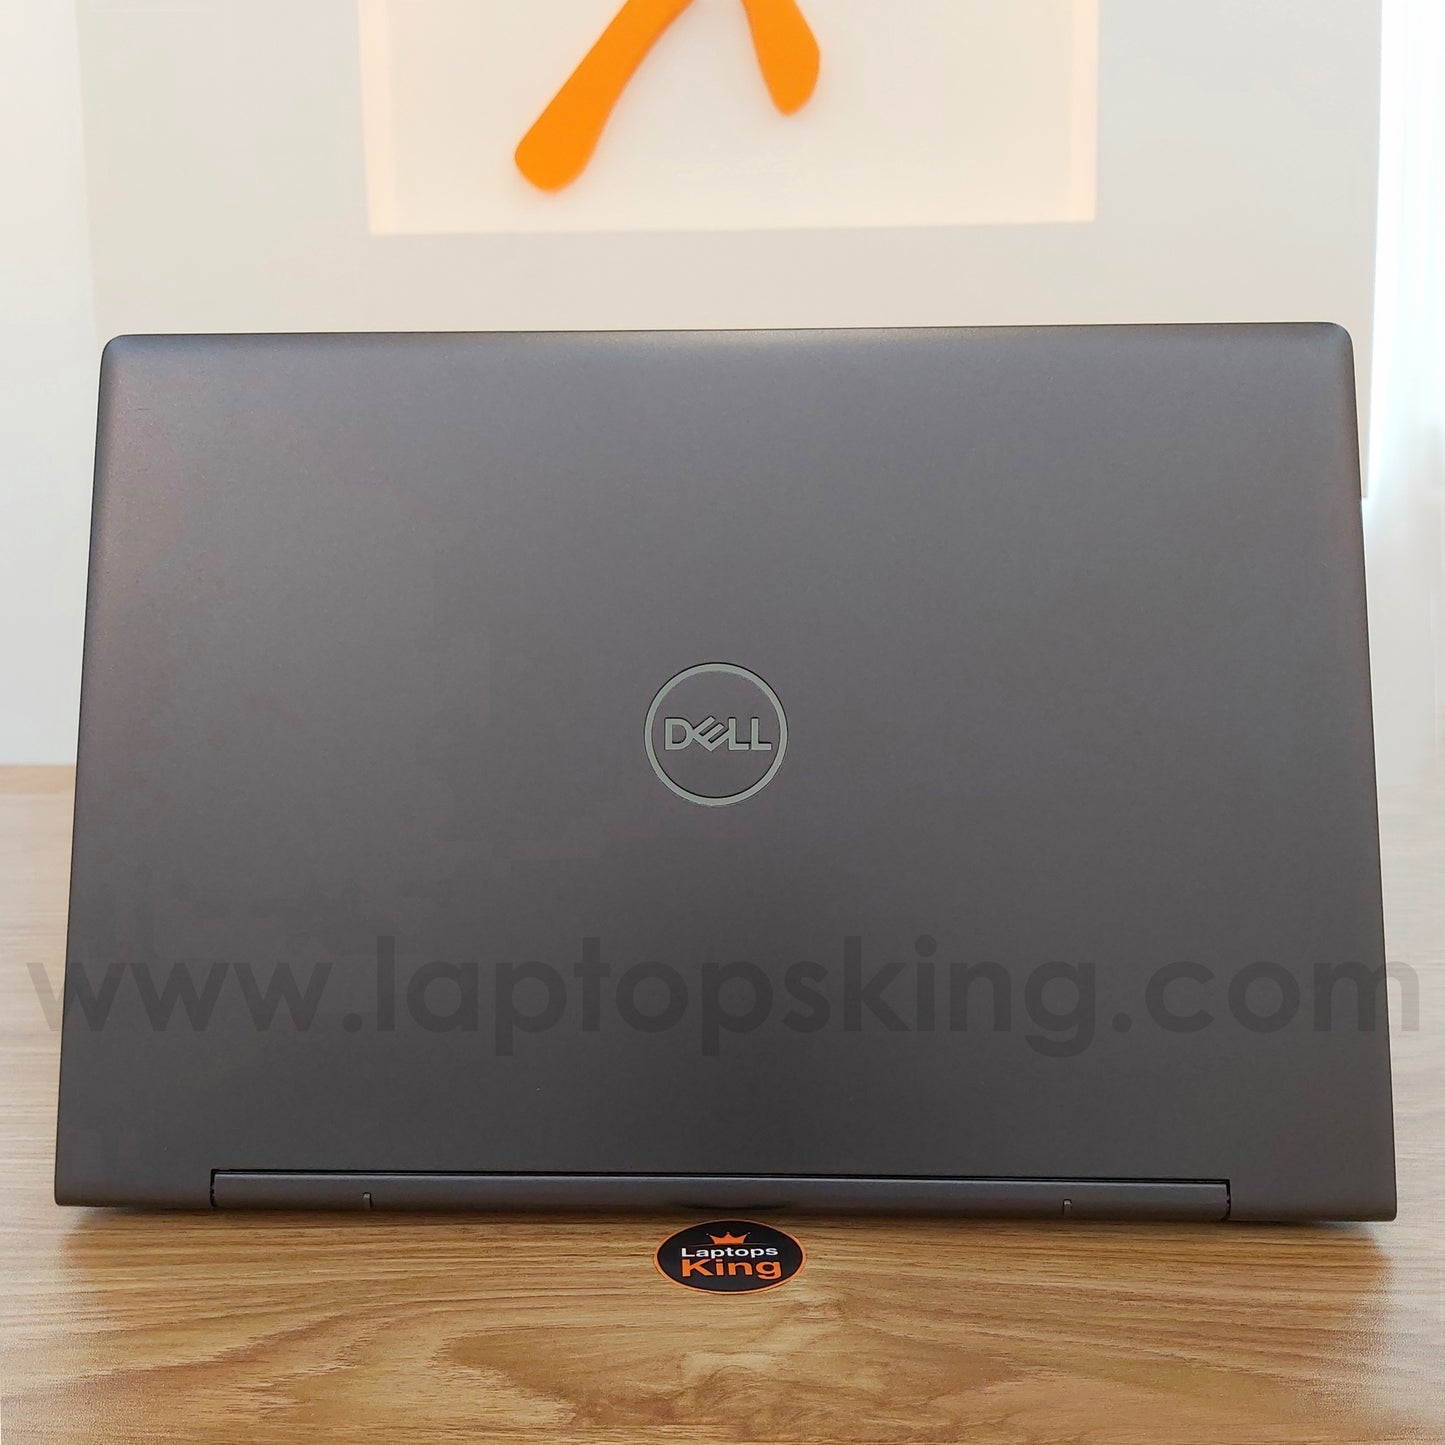 Dell Inspiron 7591 2in1 i7-10510u GeForce Mx250 4K Laptop Offers (New Open Box)